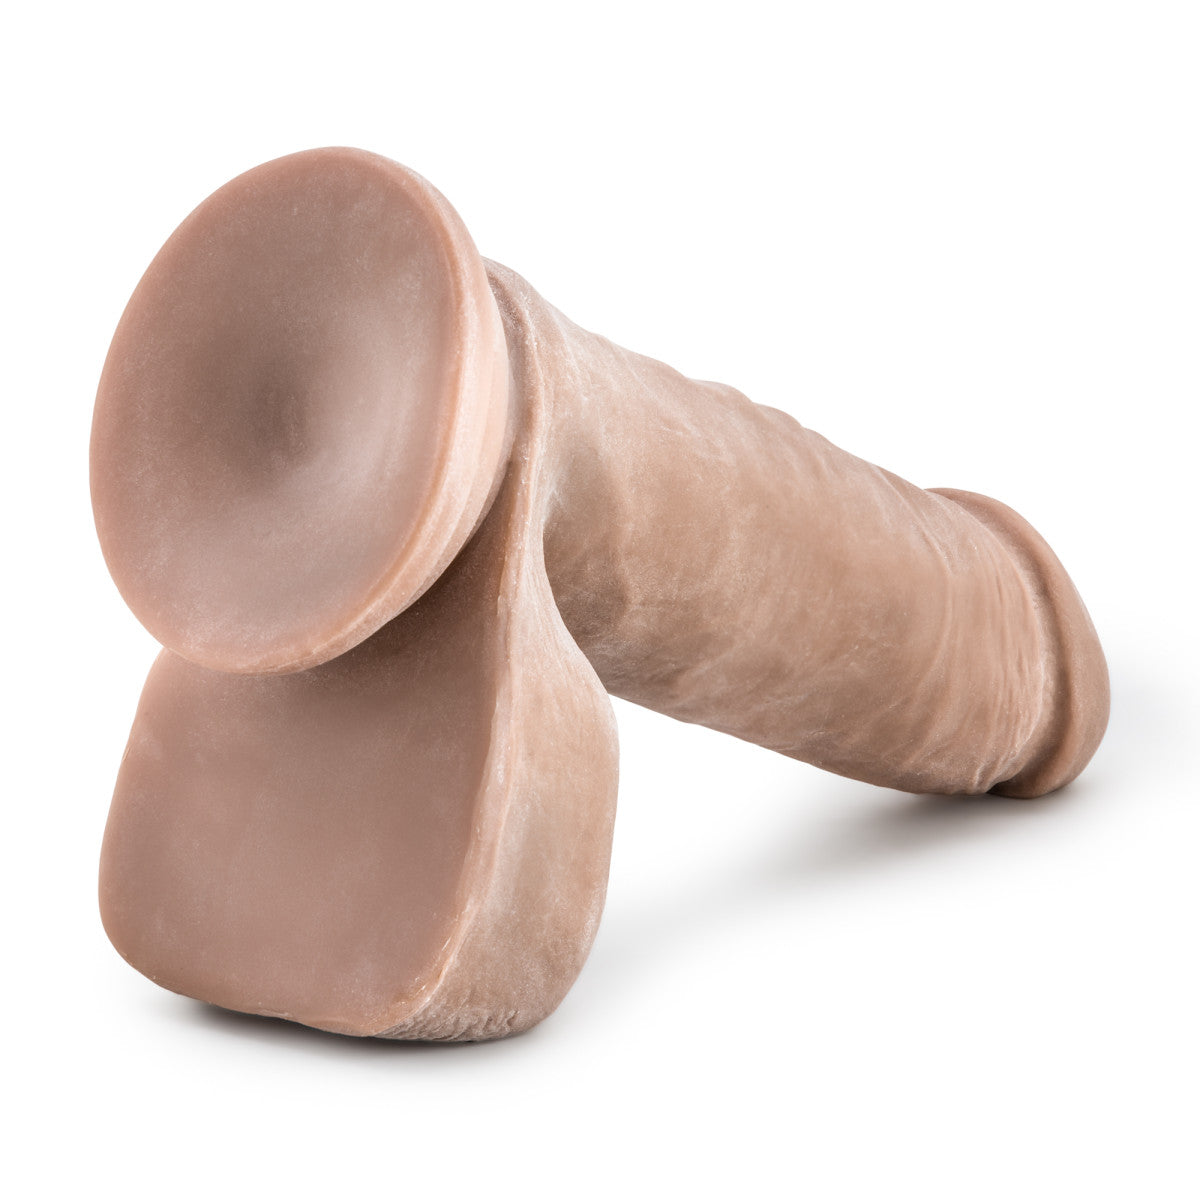 Mocha skin tone ultra realistic dildo with a realistic head, subtle veins along the straight but flexible shaft and small realistic balls. Suction cup base. Additional images show alternate angles.